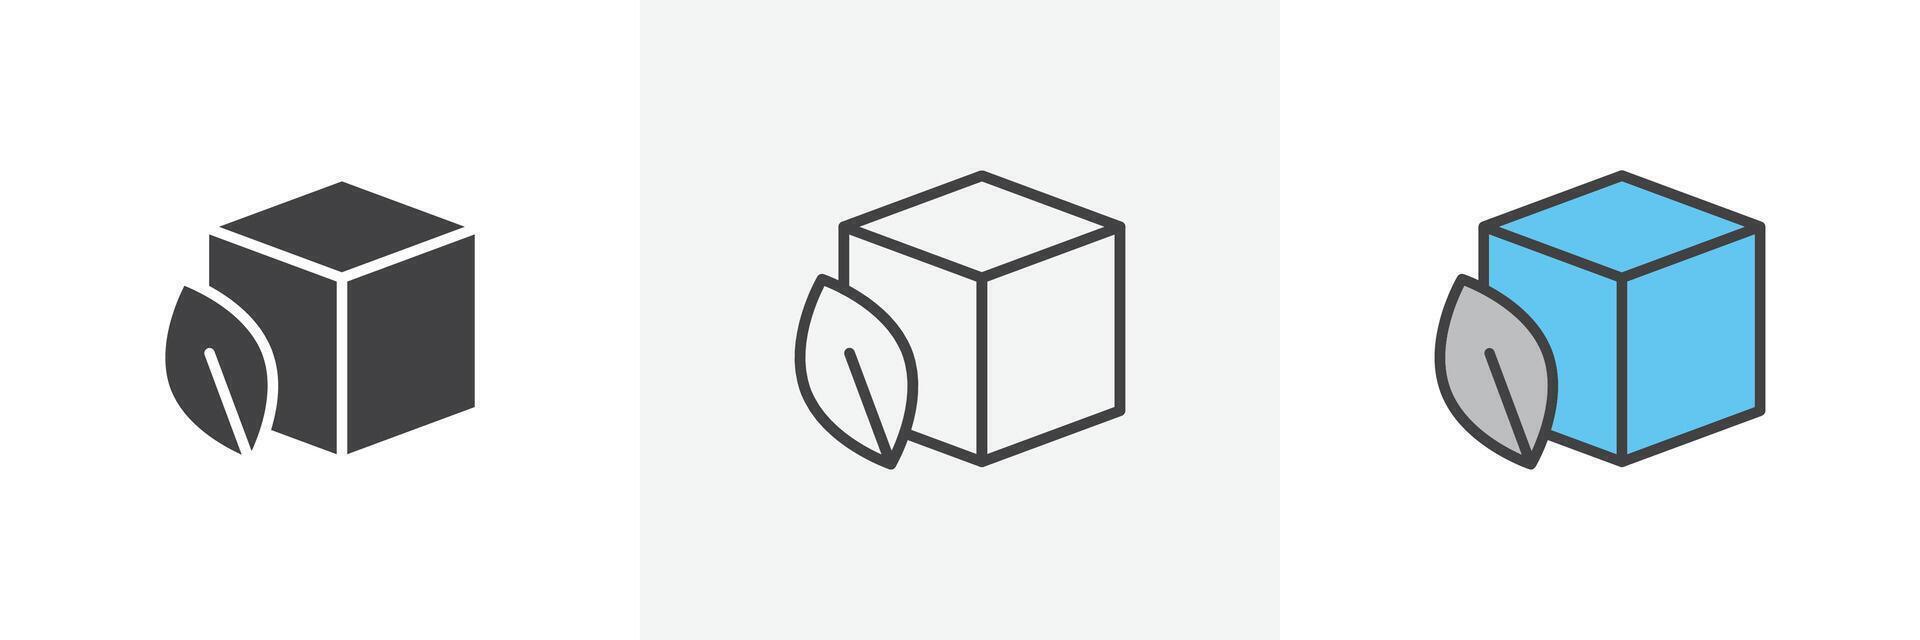 Eco packaging icon vector